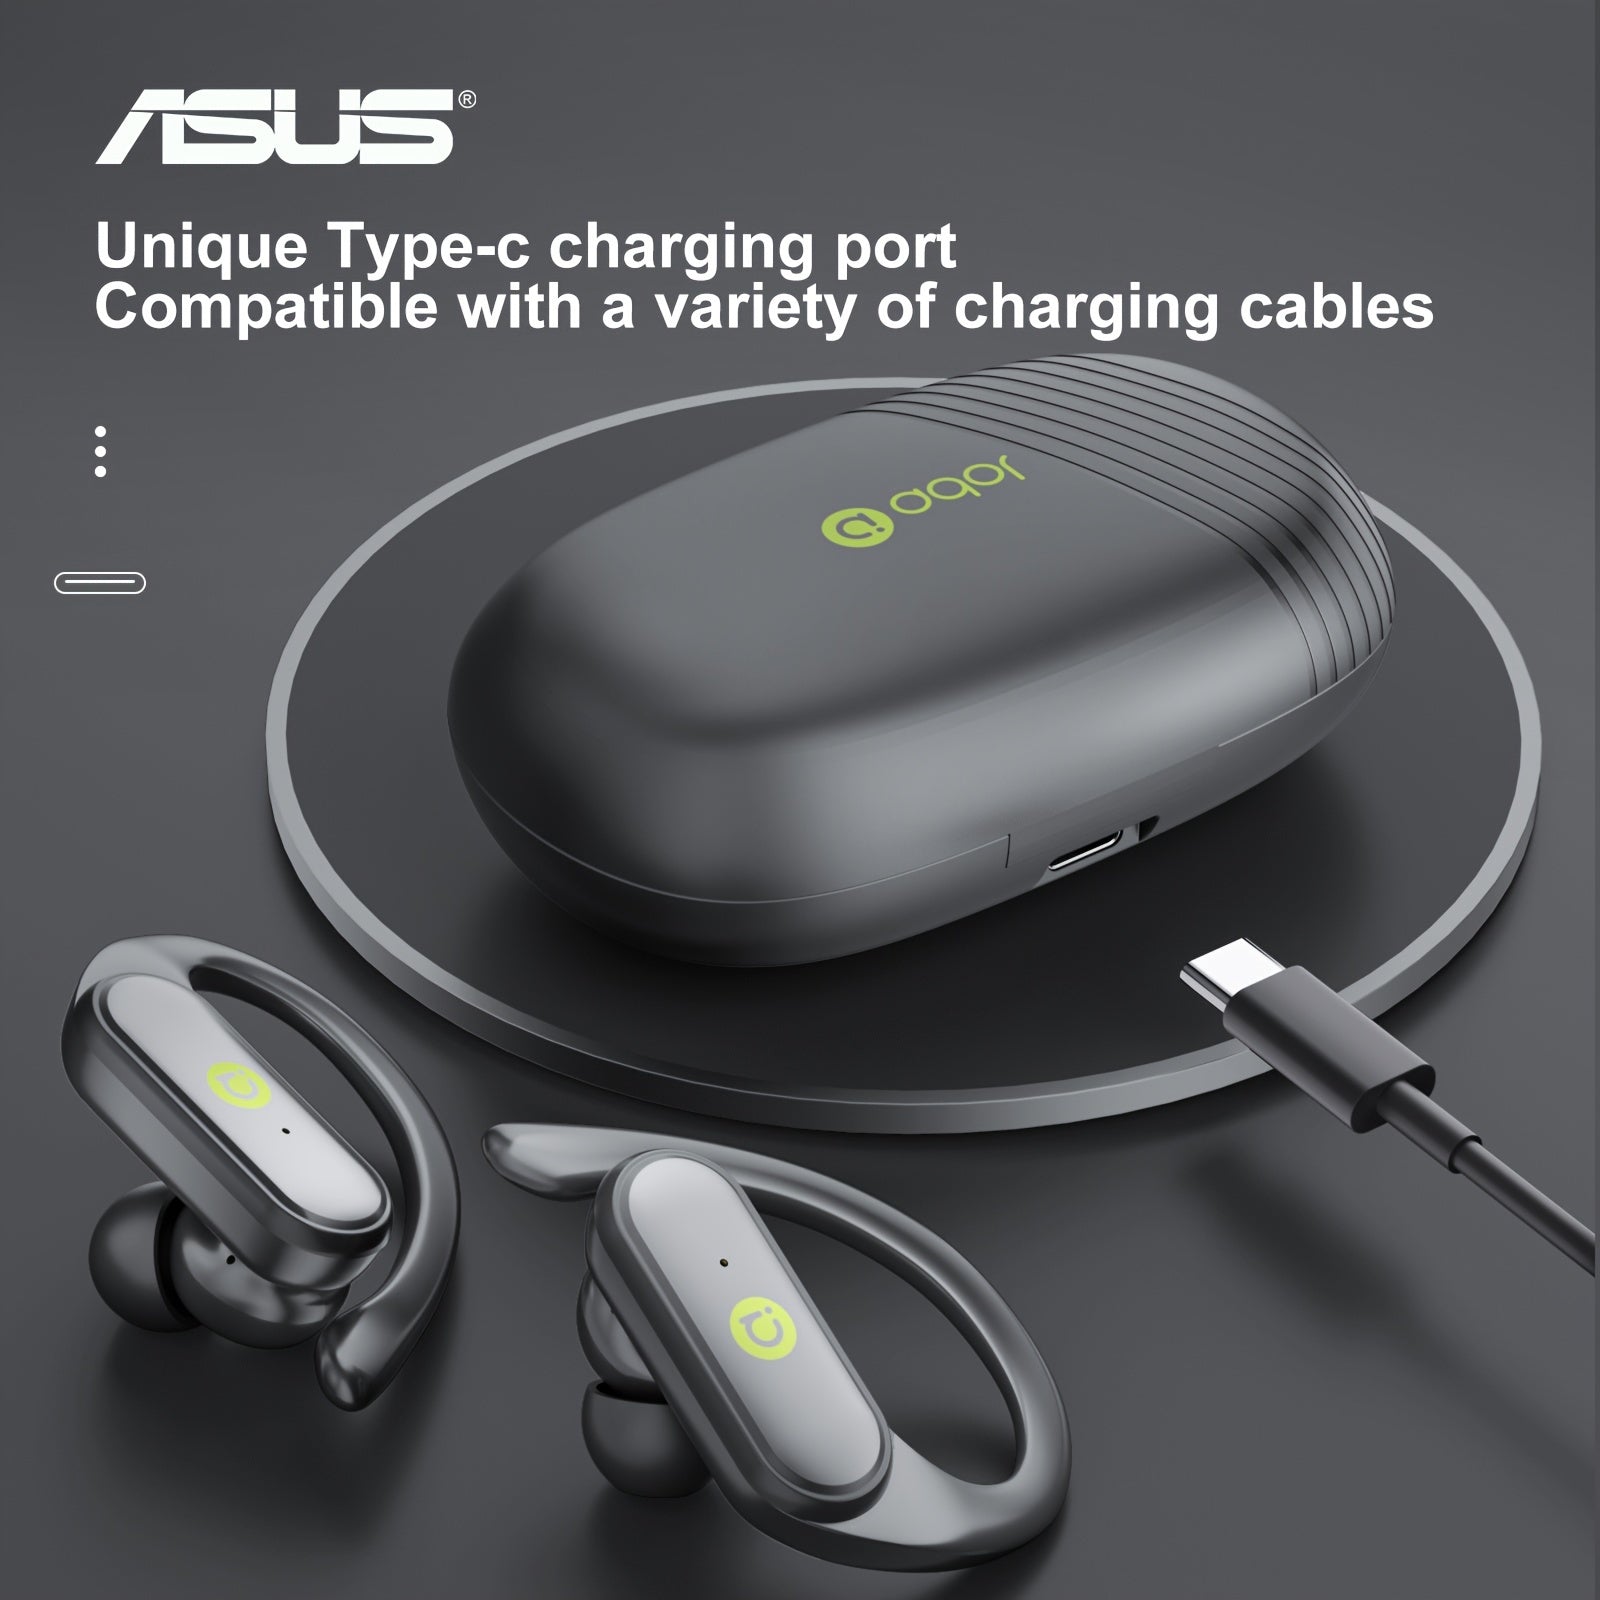 ASUS AS-G05 Earphones wireless Game Mode Low Latency And Smoother